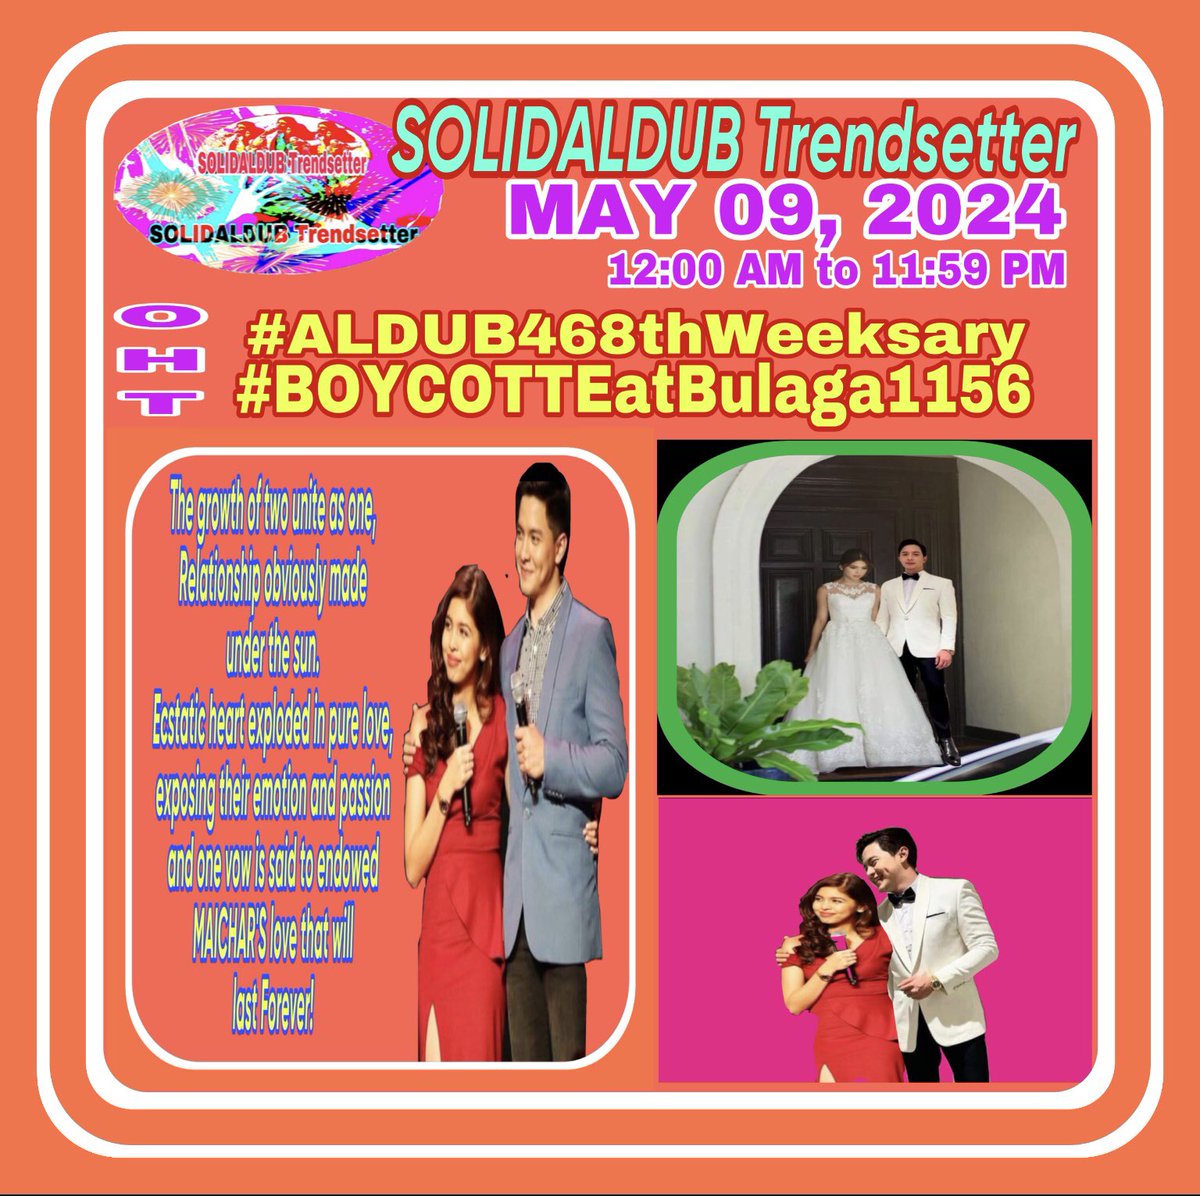 Even with d tremendous obstacles faced, TBADN will continue d fight til everyone involved in d zarsuela acknowledges d TRUTH about ALDUB & ALDUBNATION. We r a FANDOM - a FANMILY that vows 2 support, love & protect ALDUB ALDUB PA RIN #ALDUB458thWeeksary #BOYCOTTEatBulaga1156